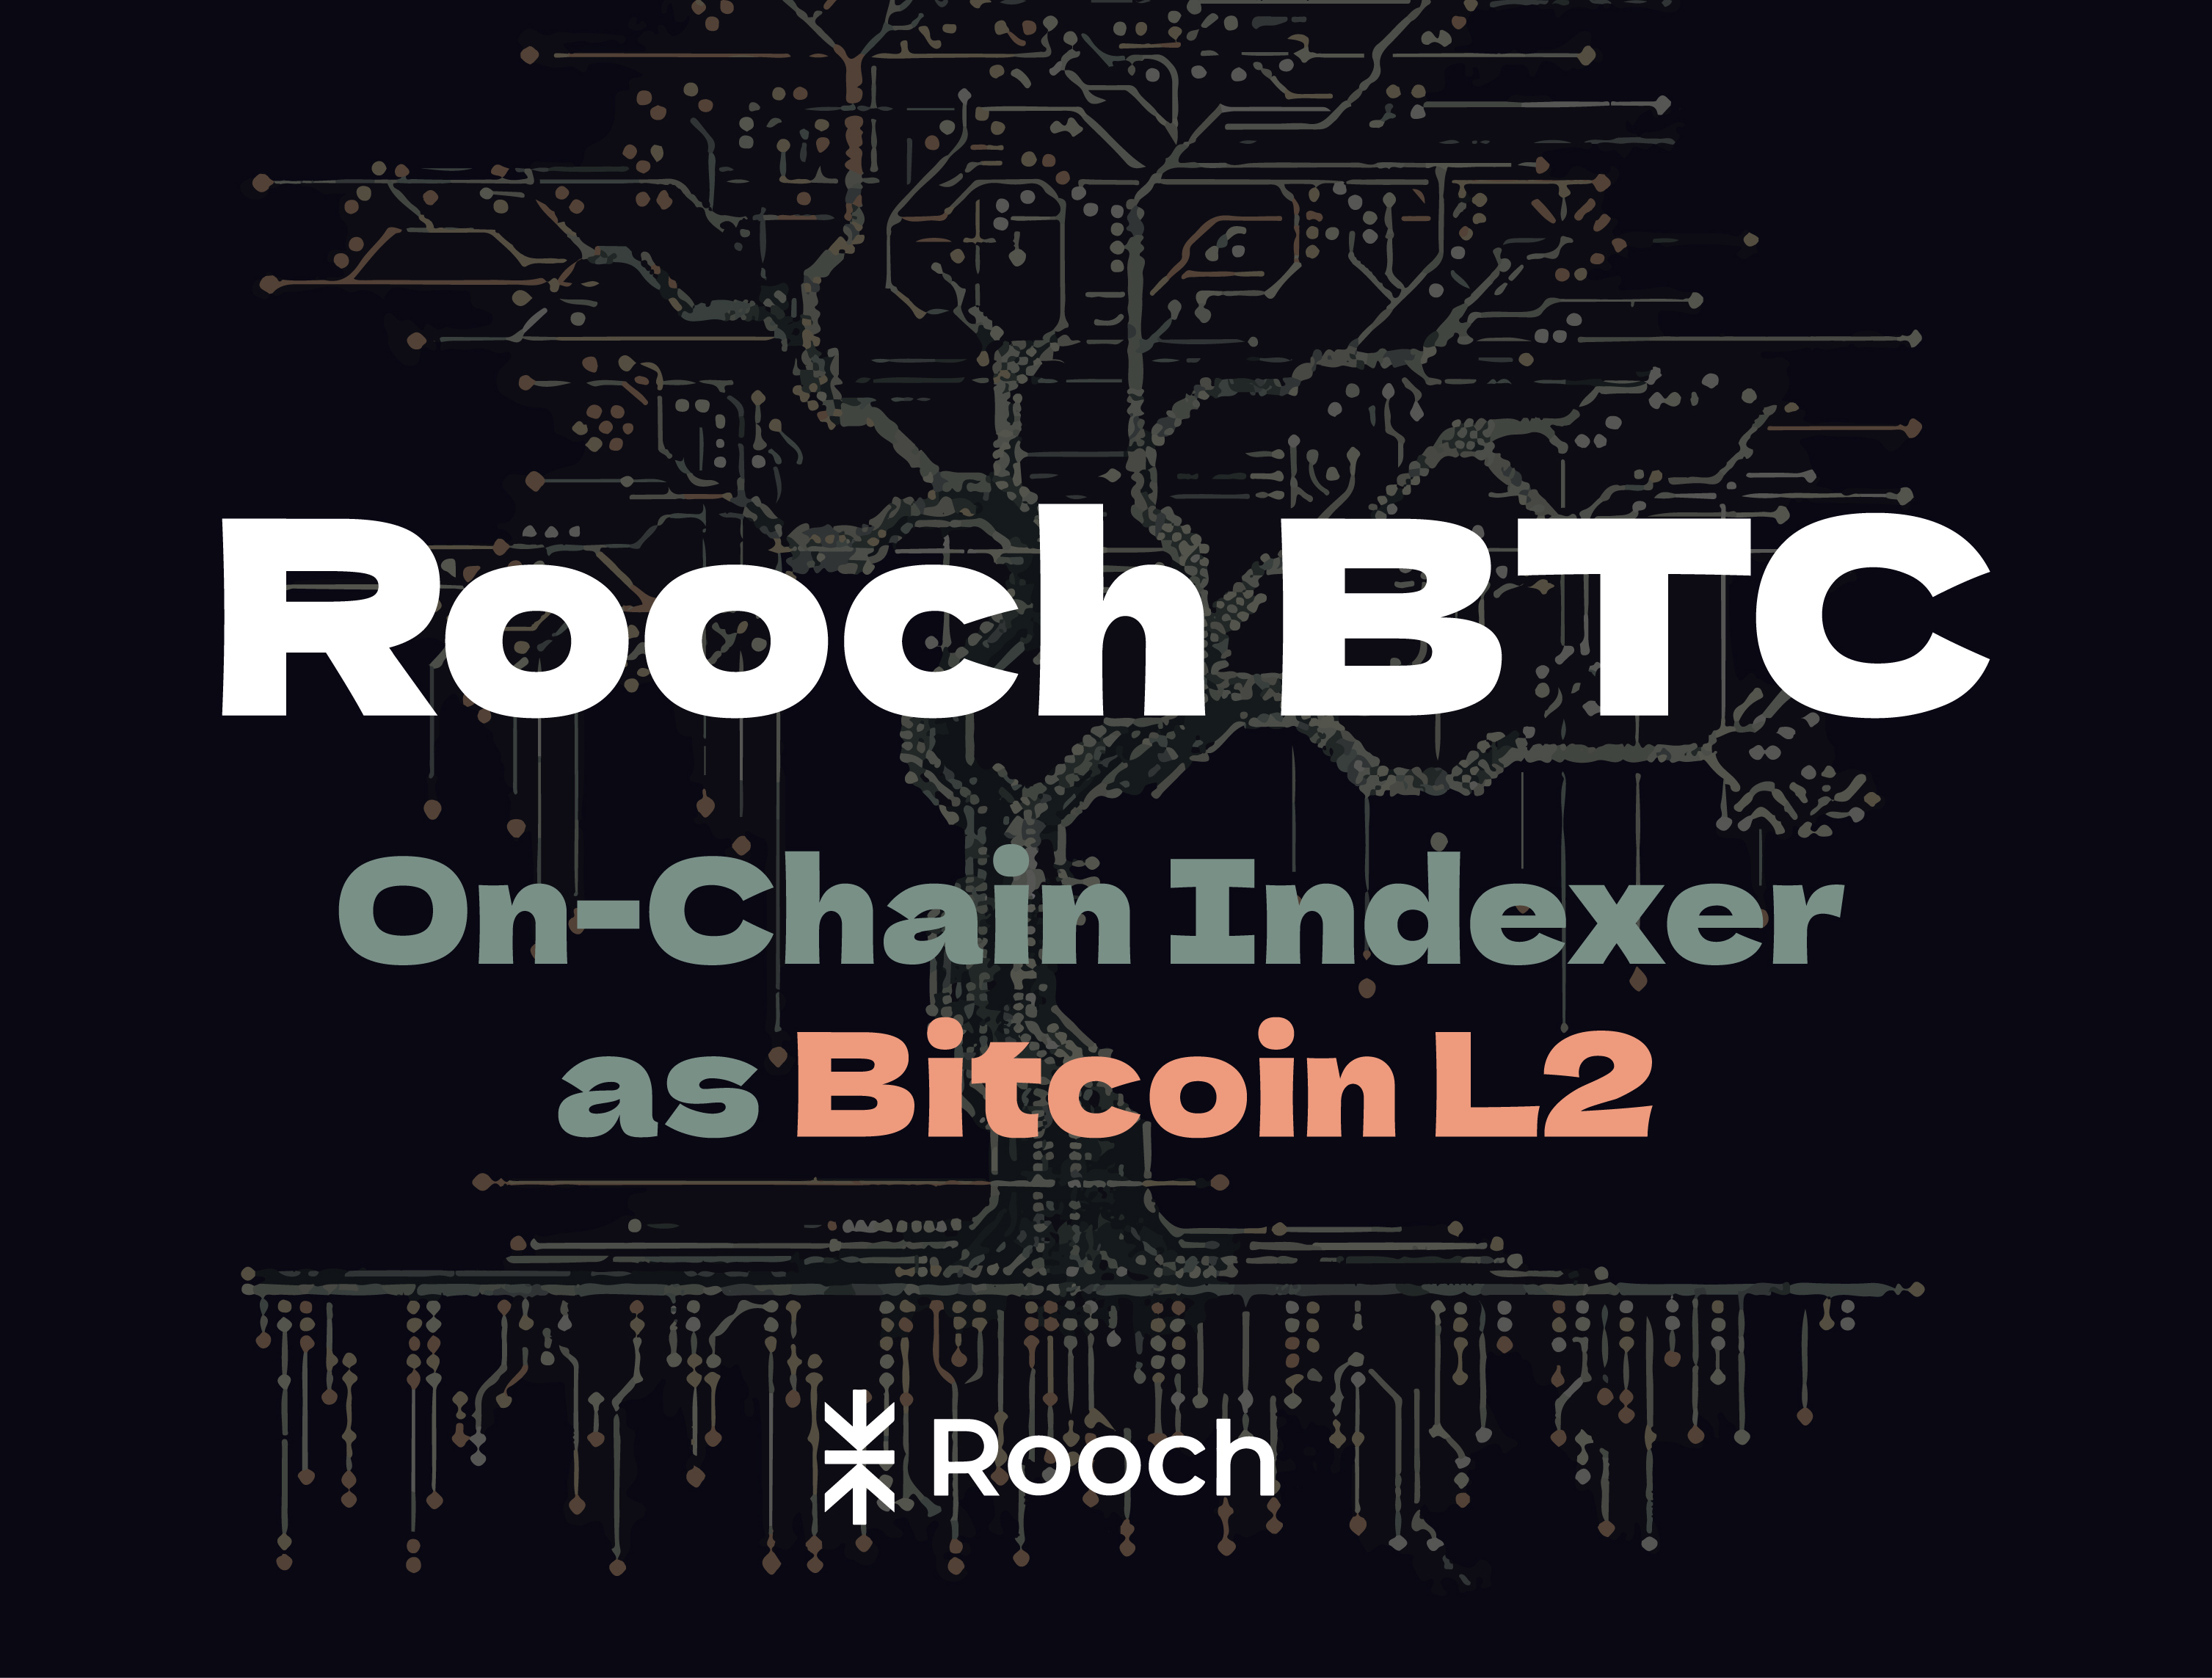 RoochBTC - On - Chain Indexer as Bitcoin L2